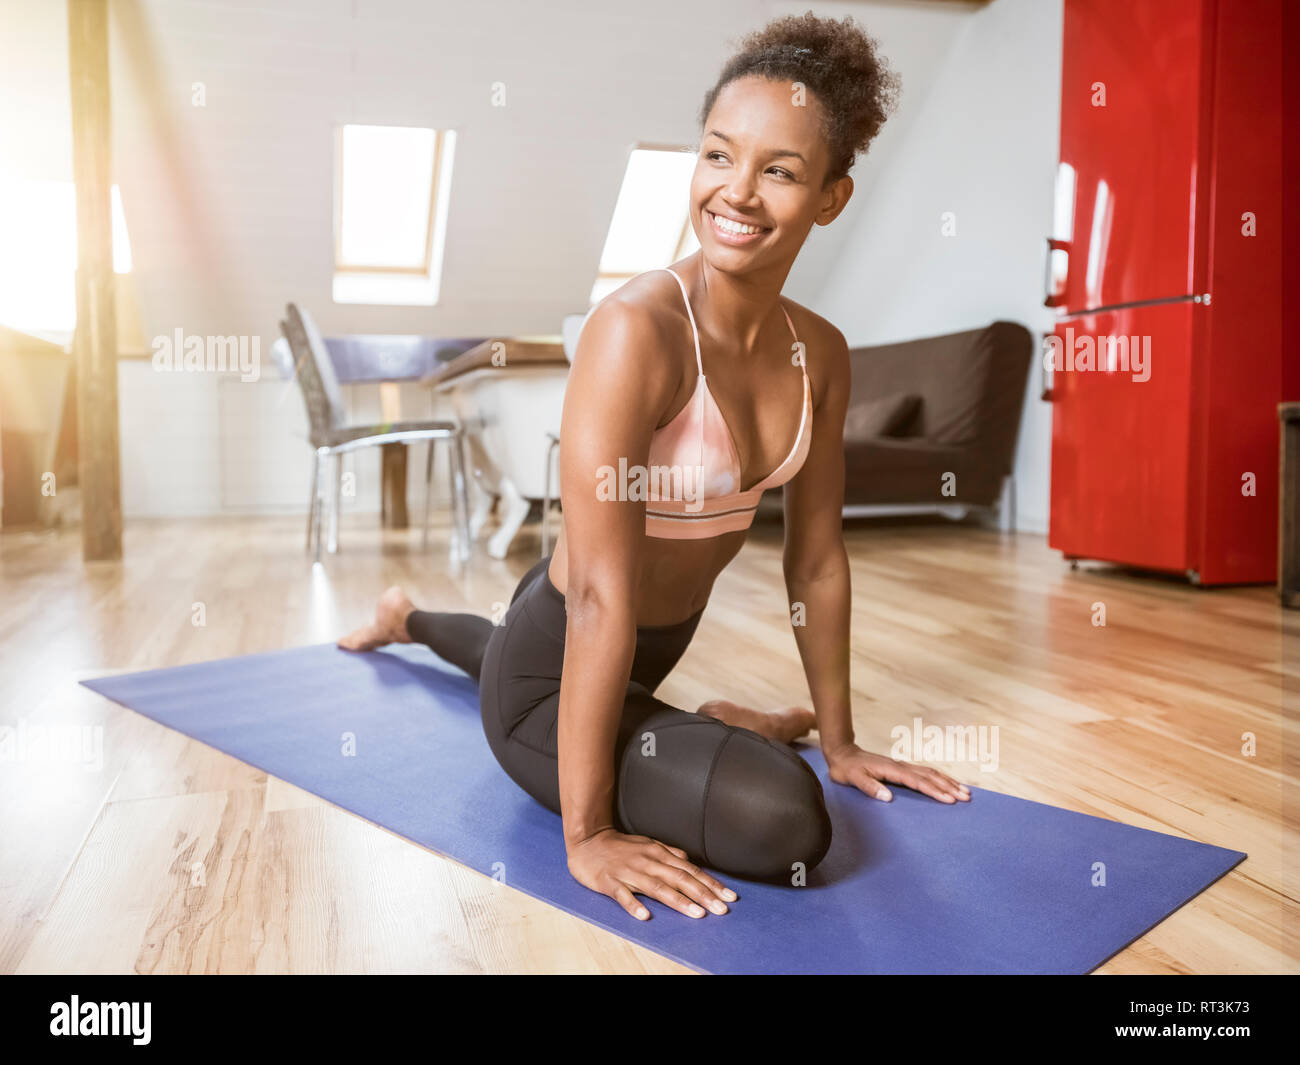 Smiling young woman practicing yoga Stock Photo